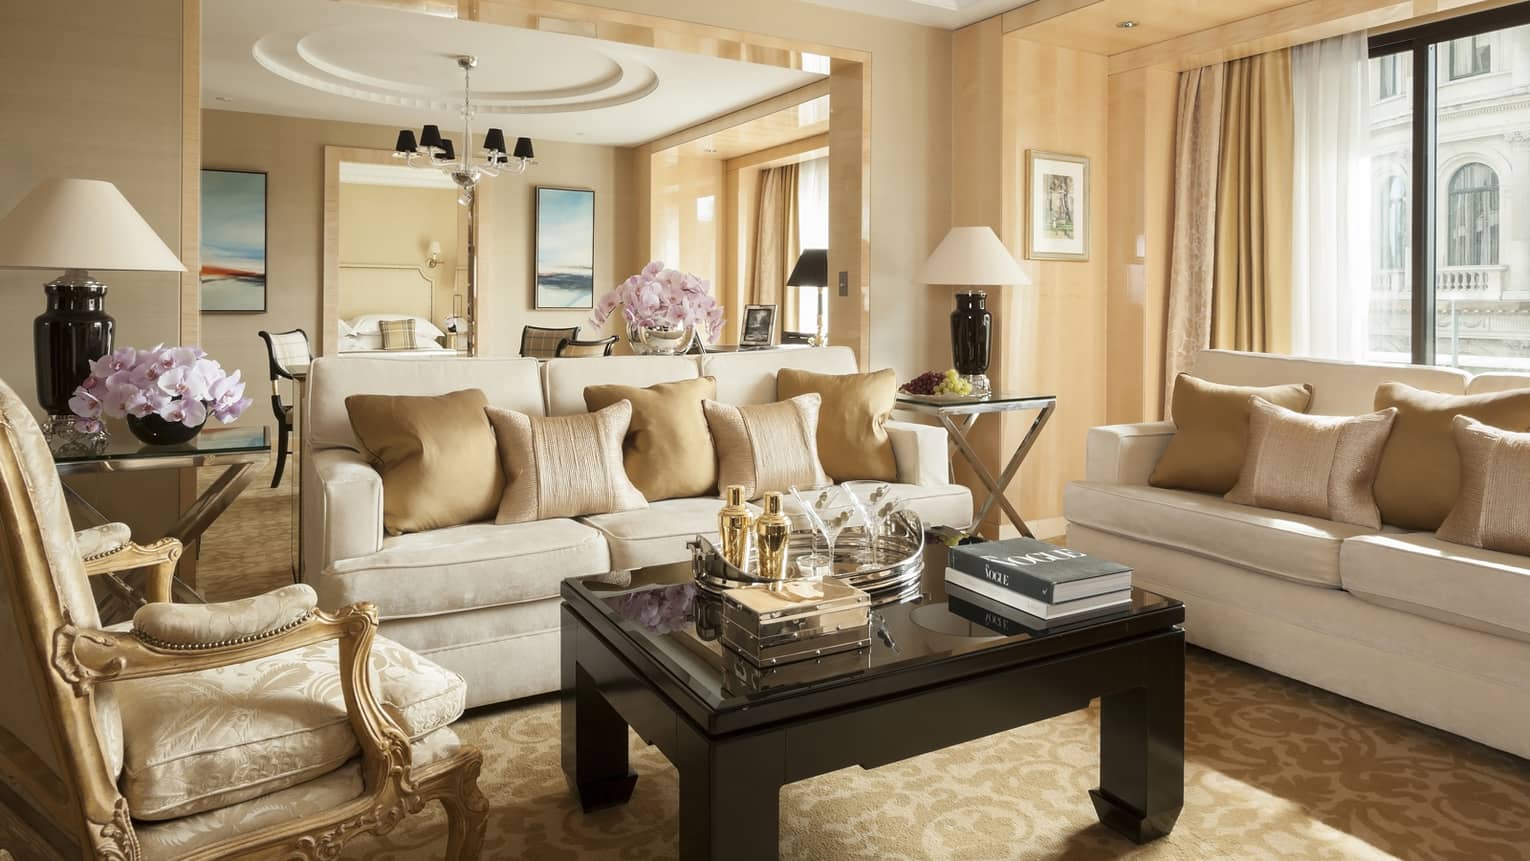 Grand One-Bedroom Suite elegant sofas, gold accent chairs under tall ceilings, dining room in background